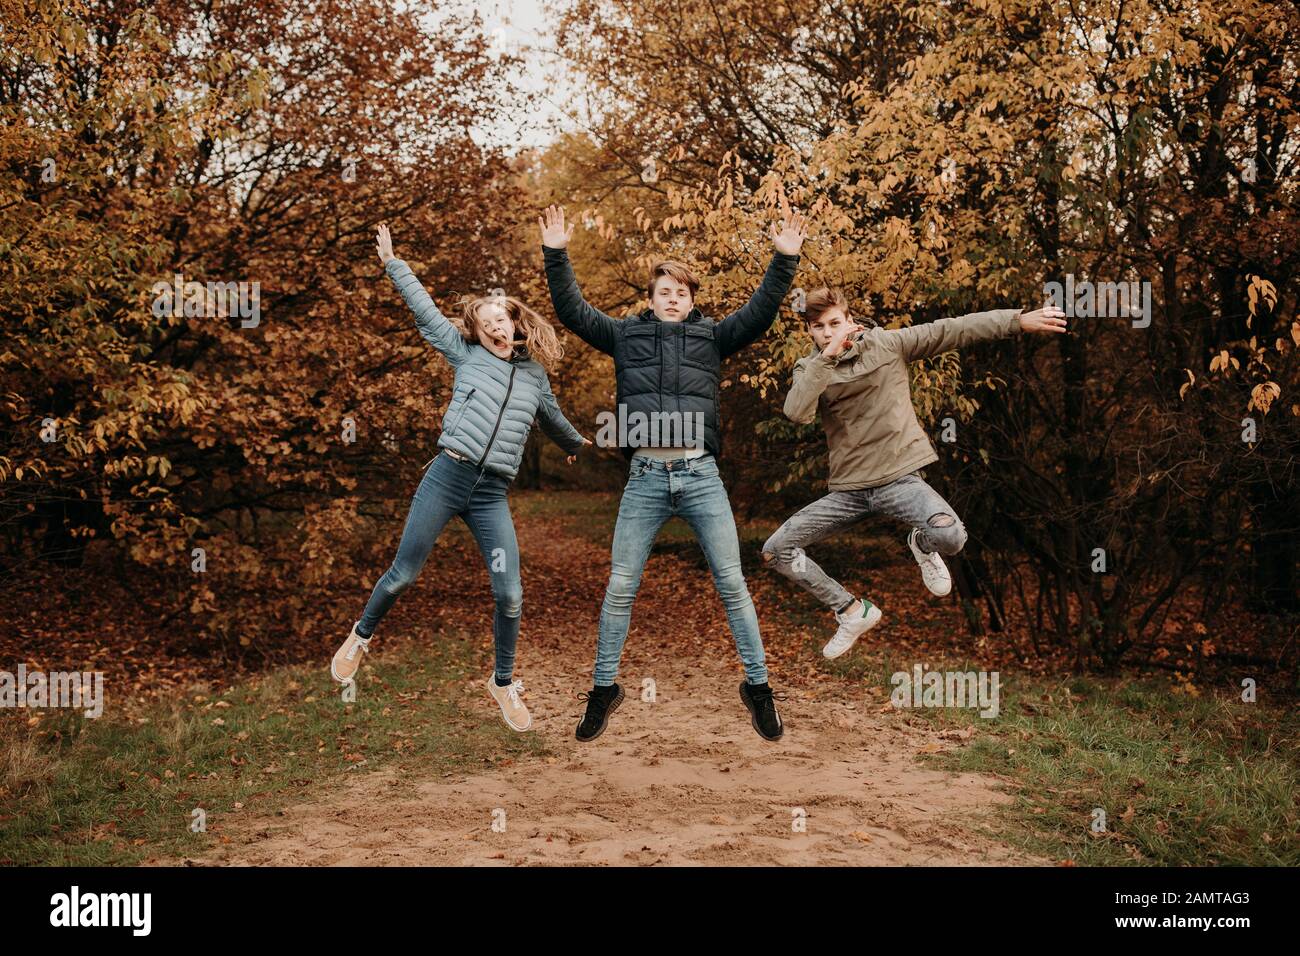 Three children in an autumn woodland jumping in the air, Netherlands Stock Photo